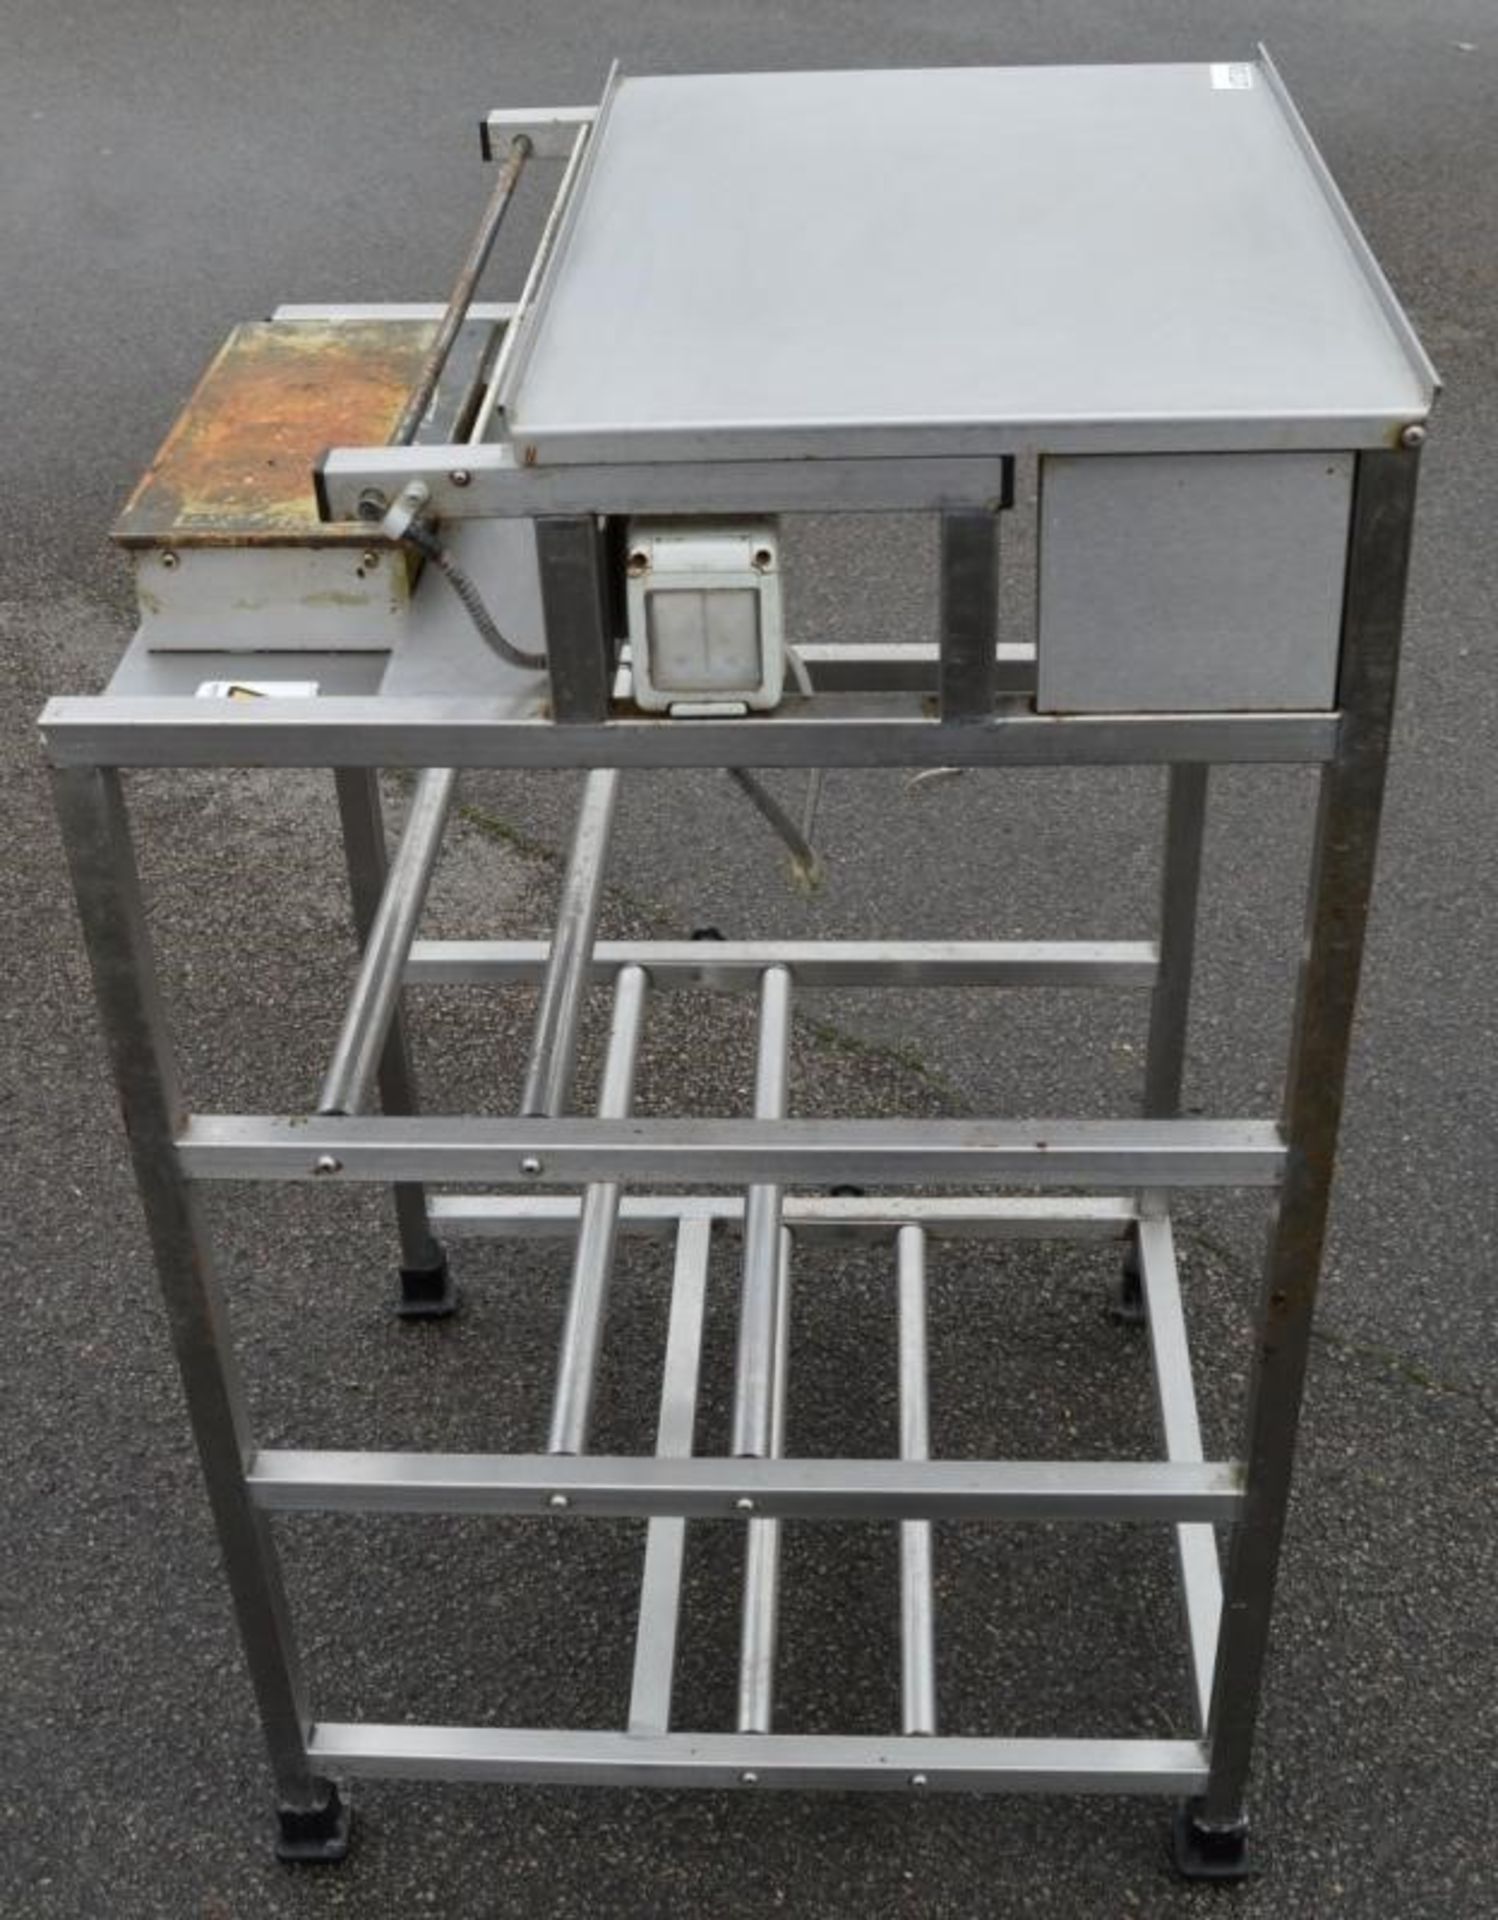 1 x Freestanding Stretch Wrap Tray Overwapper Machine - Stainless Steel Constructons - 240v - CL282 - Image 2 of 7